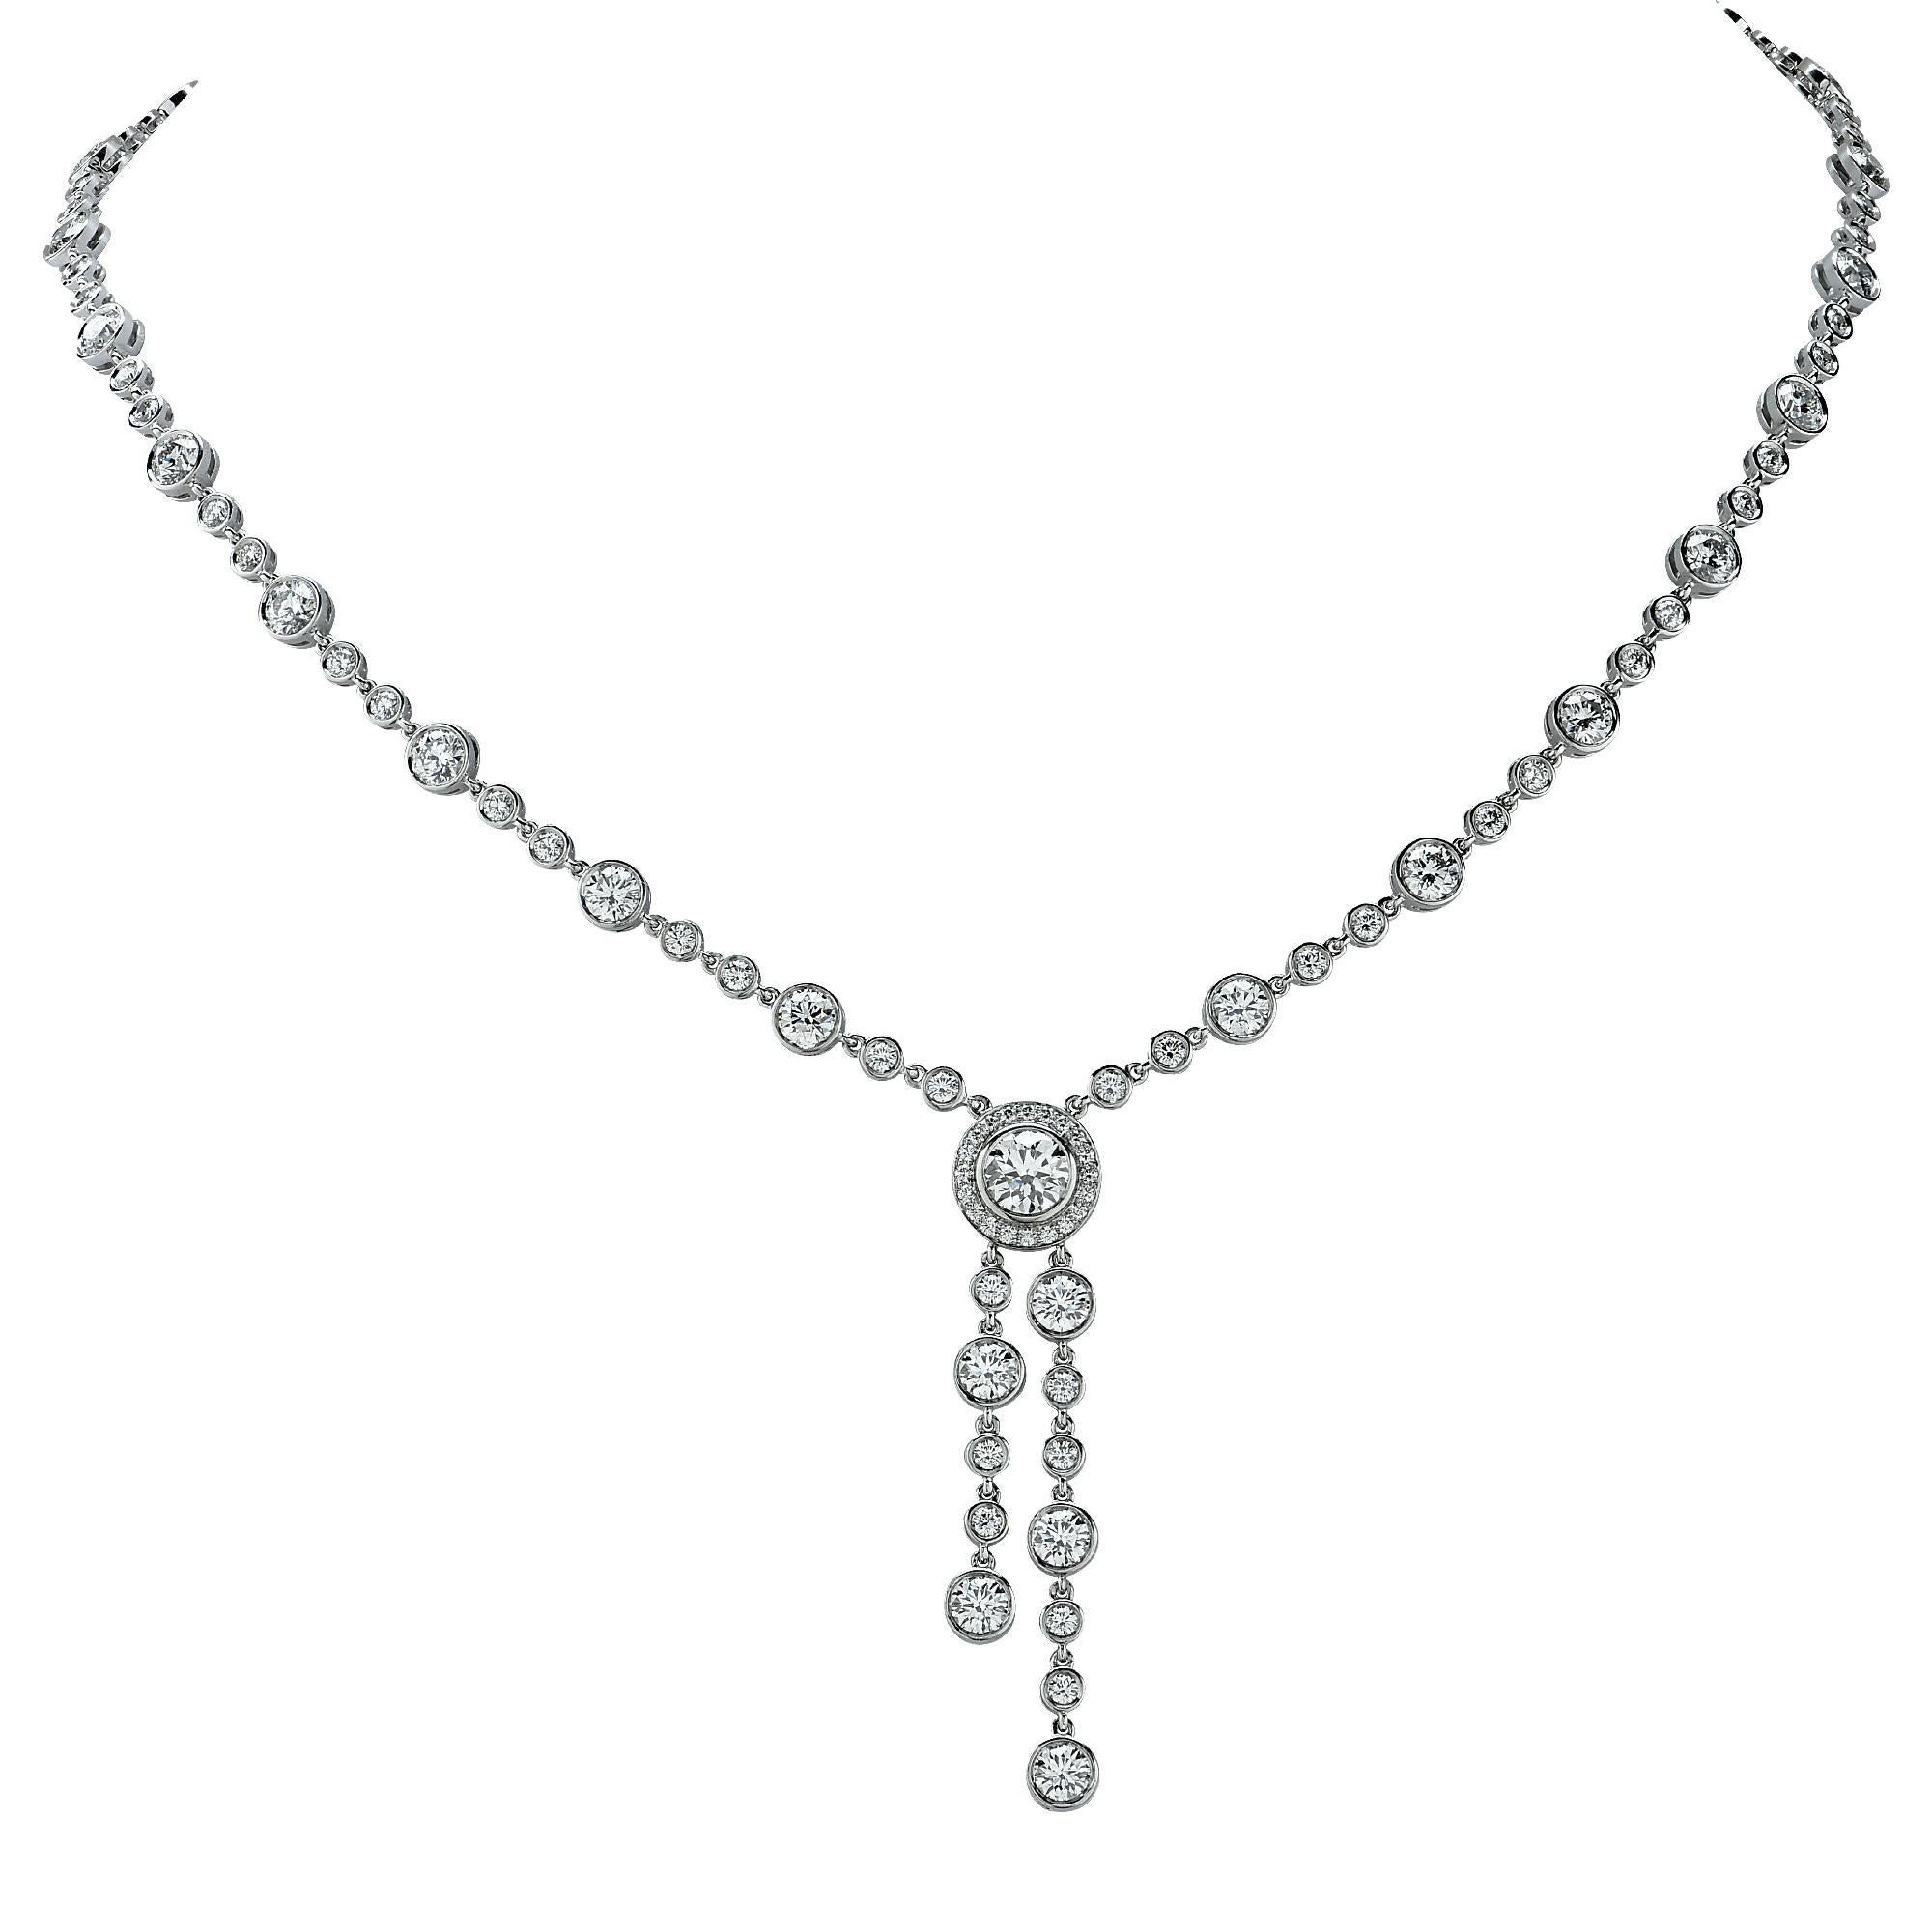 Platinum Tiffany & Co. double drop diamond necklace featuring a .70ct diamond G color and VS1 clarity surrounded by 111 rounded brilliant cut diamonds weighing 7.68ct G-H color and VS1-2 clarity bead and bezel set. The total diamond weight is